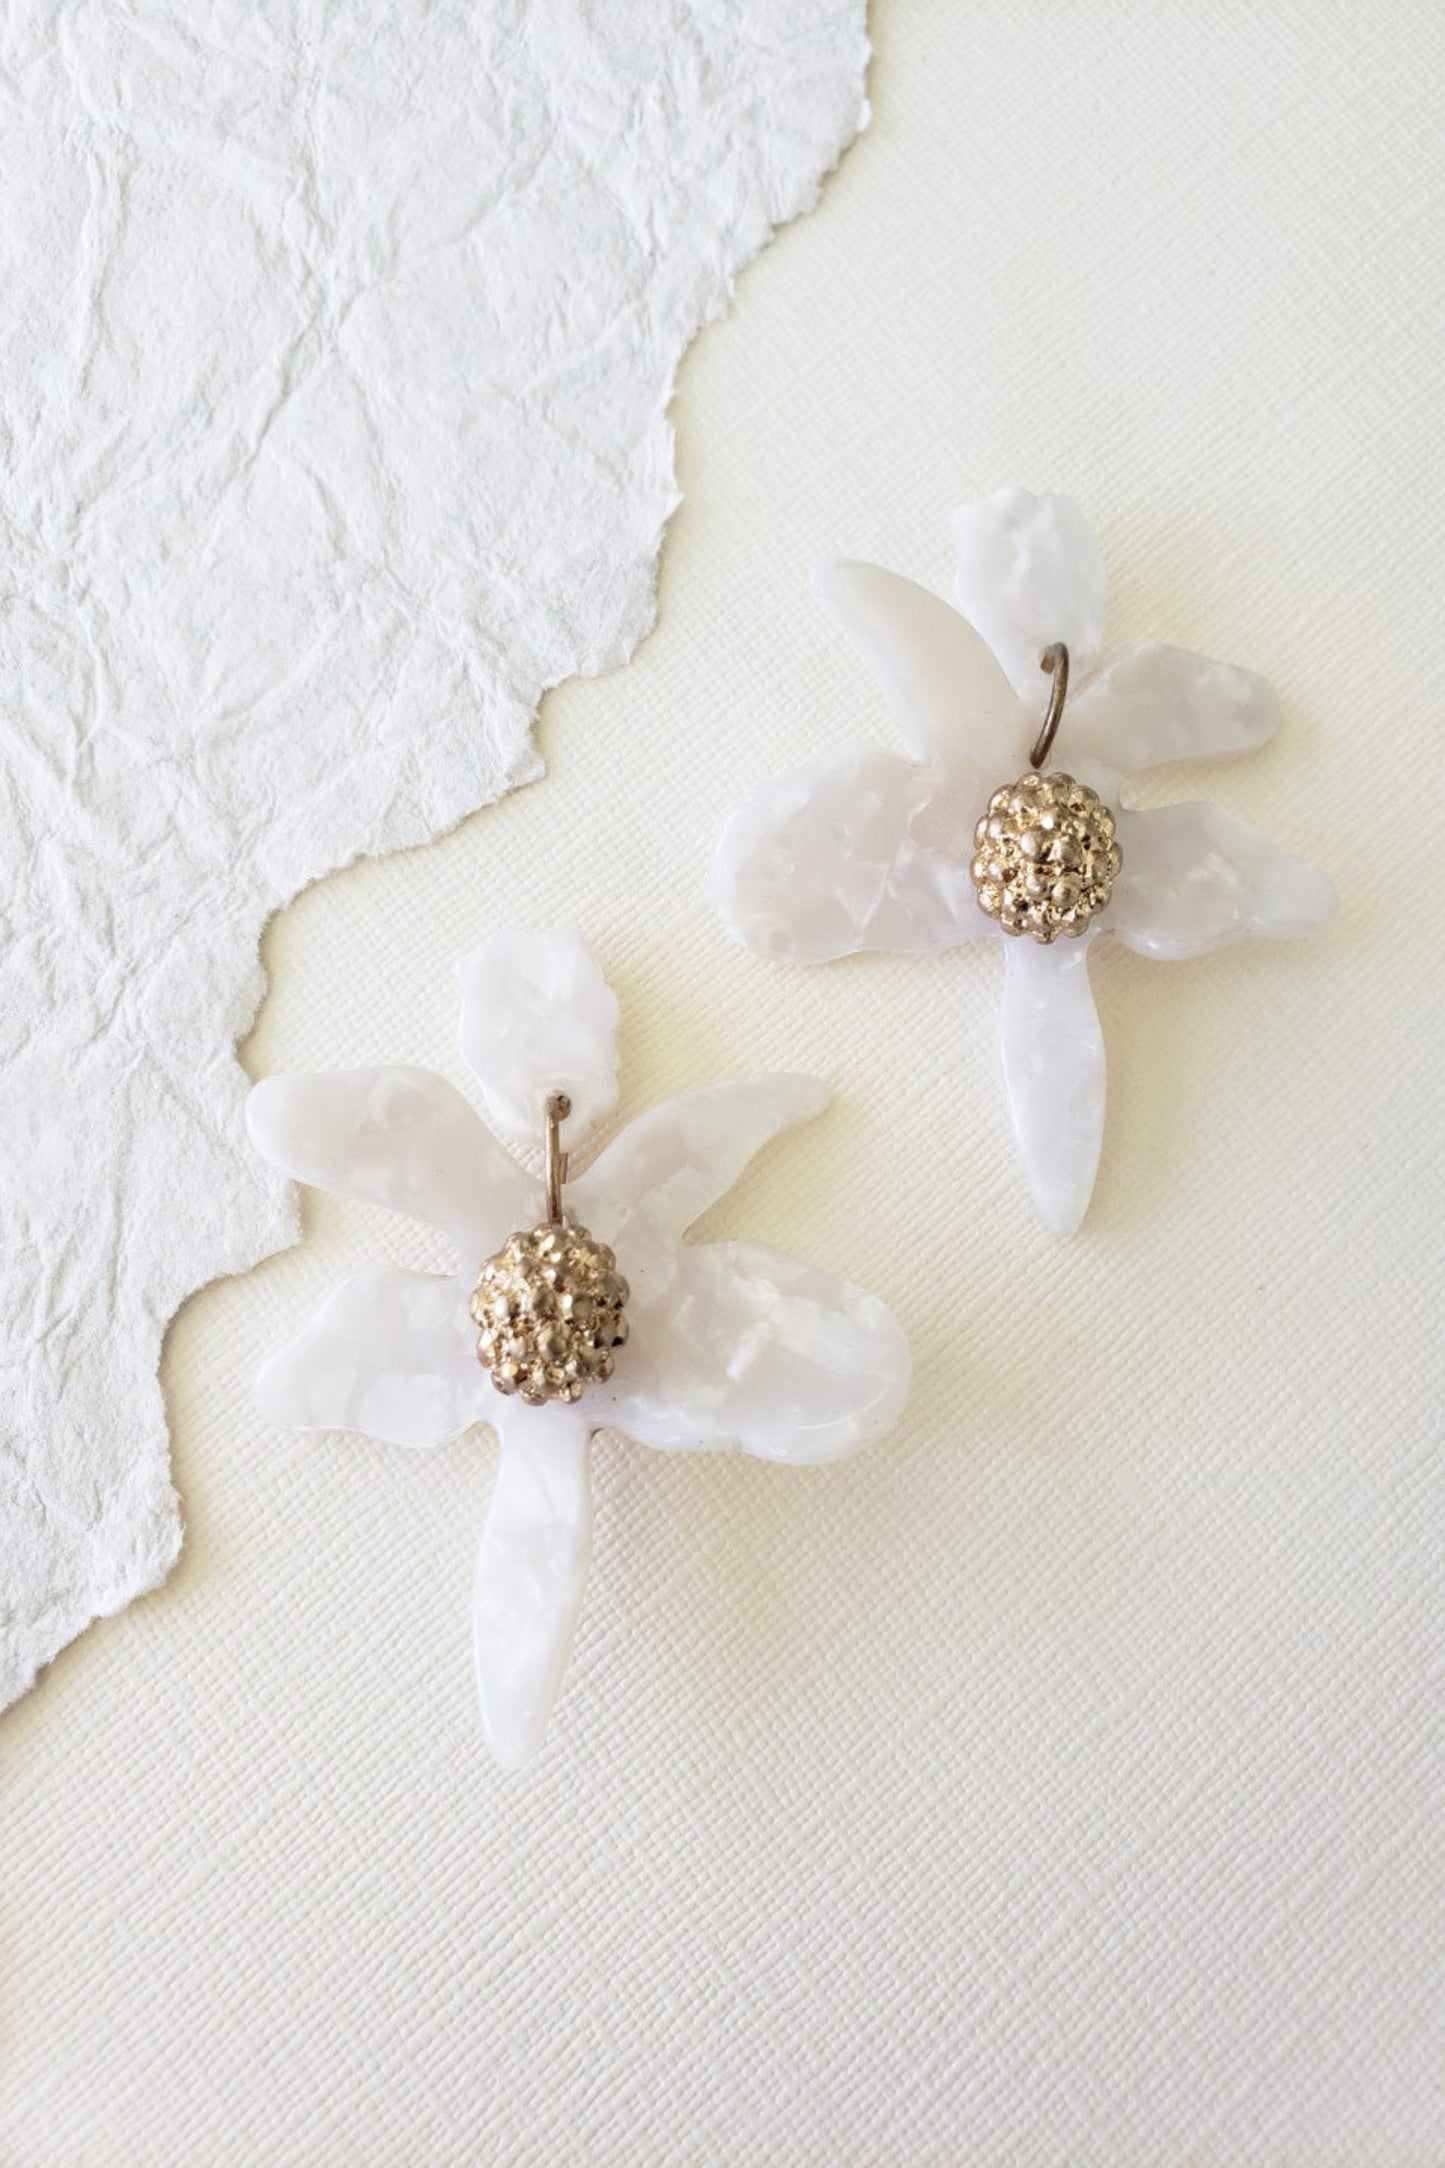 Fleur White Resin Floral Earrings | Pearl Resin Flowers with Gold Center Bead | Spring and Summer Style